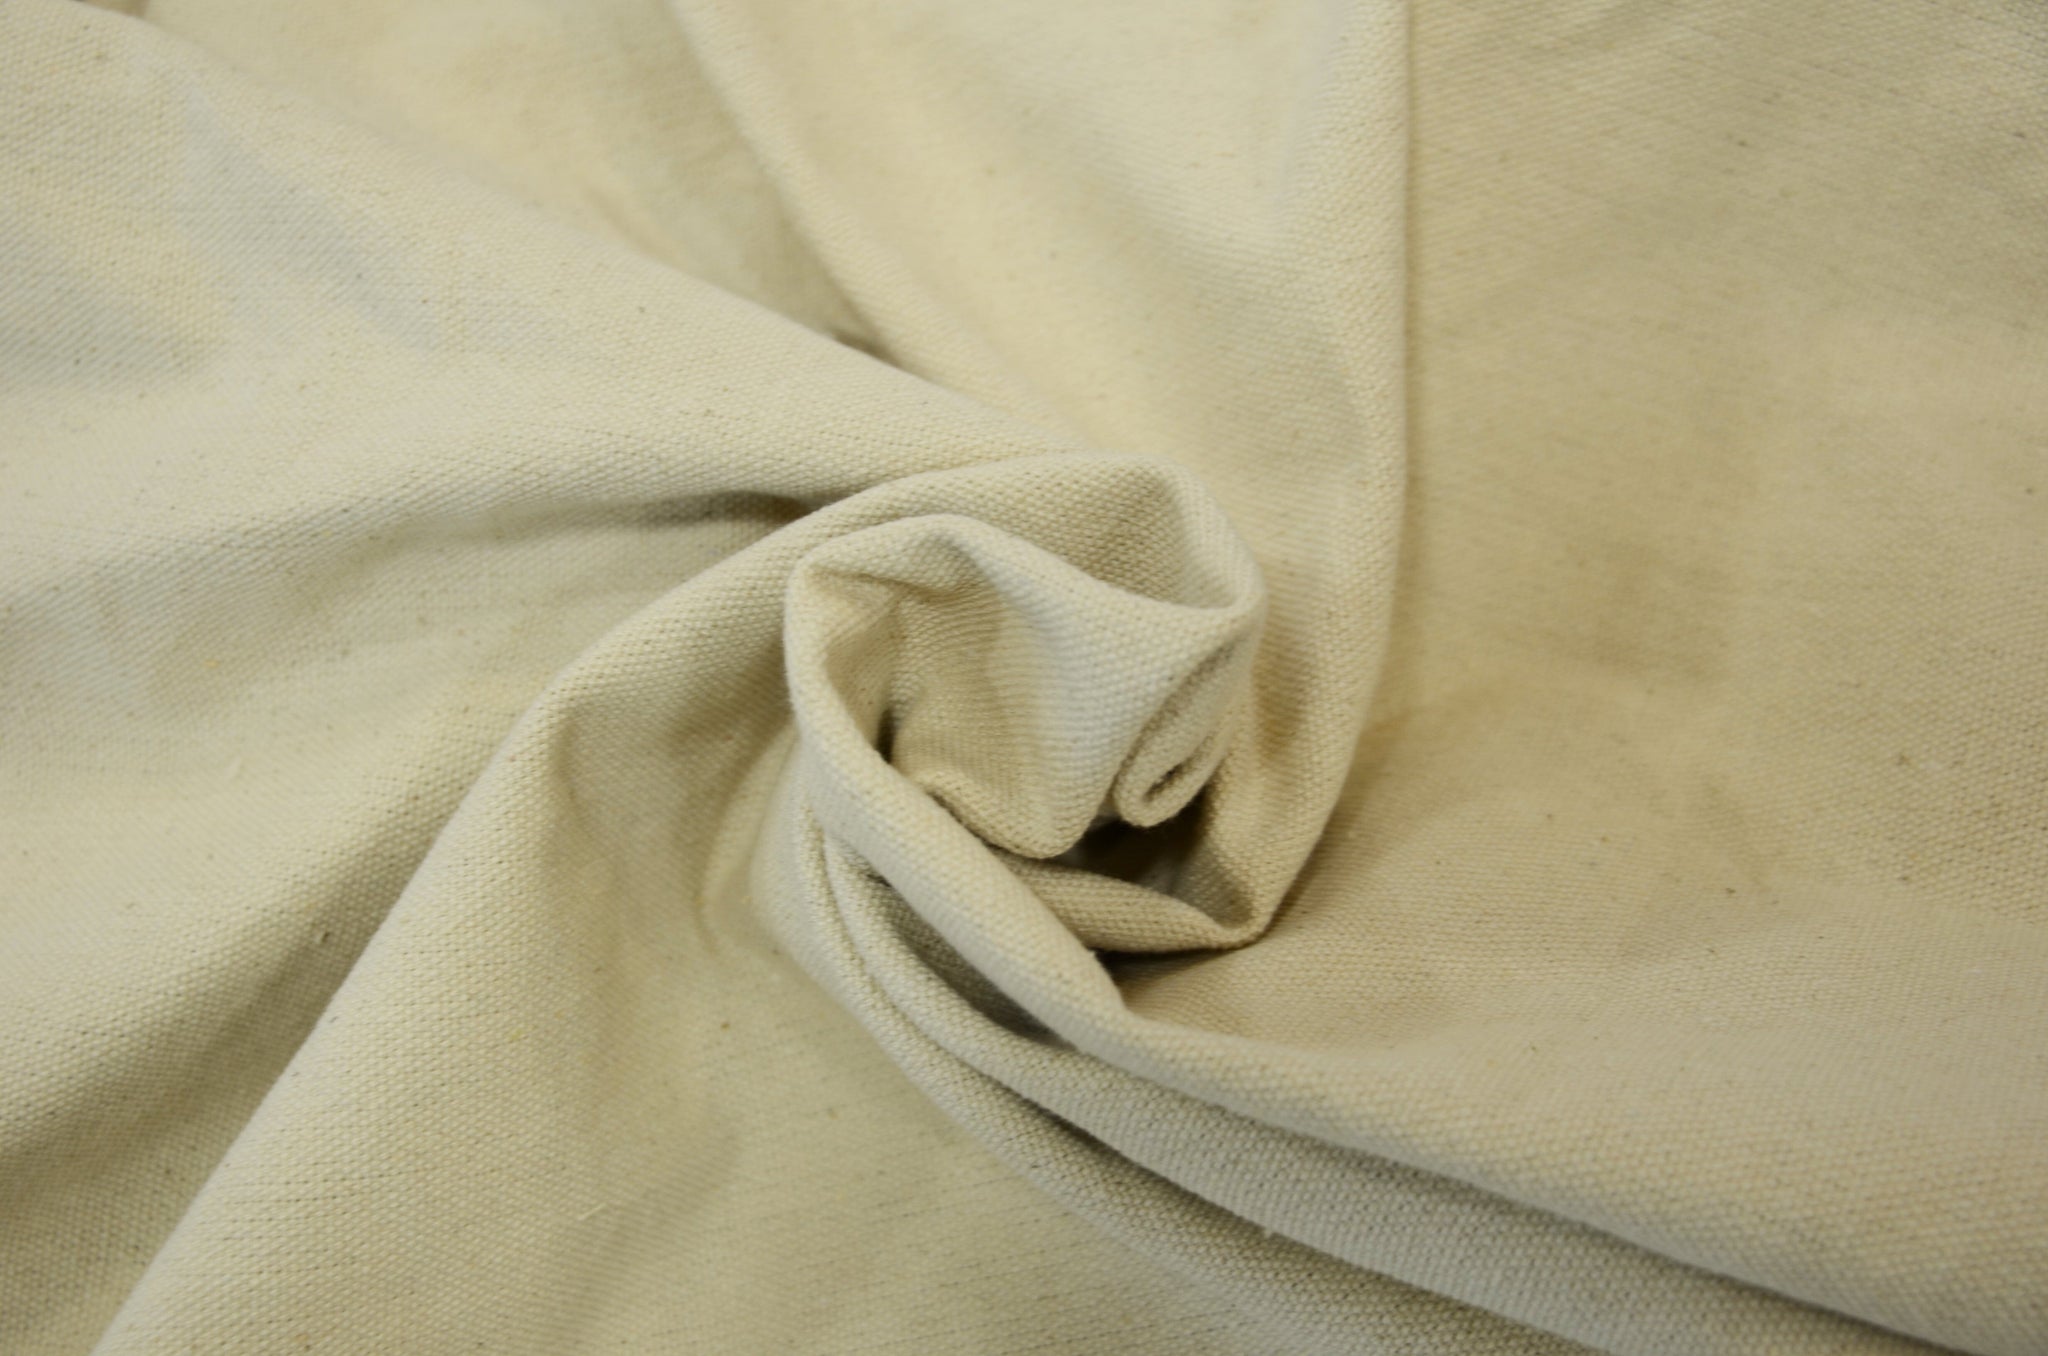 Premium 10oz Natural Cotton Duck Canvas Fabric - Versatile & Durable - 63  Width - Ideal for Crafts, Upholstery, and Home Projects - 20 Yards